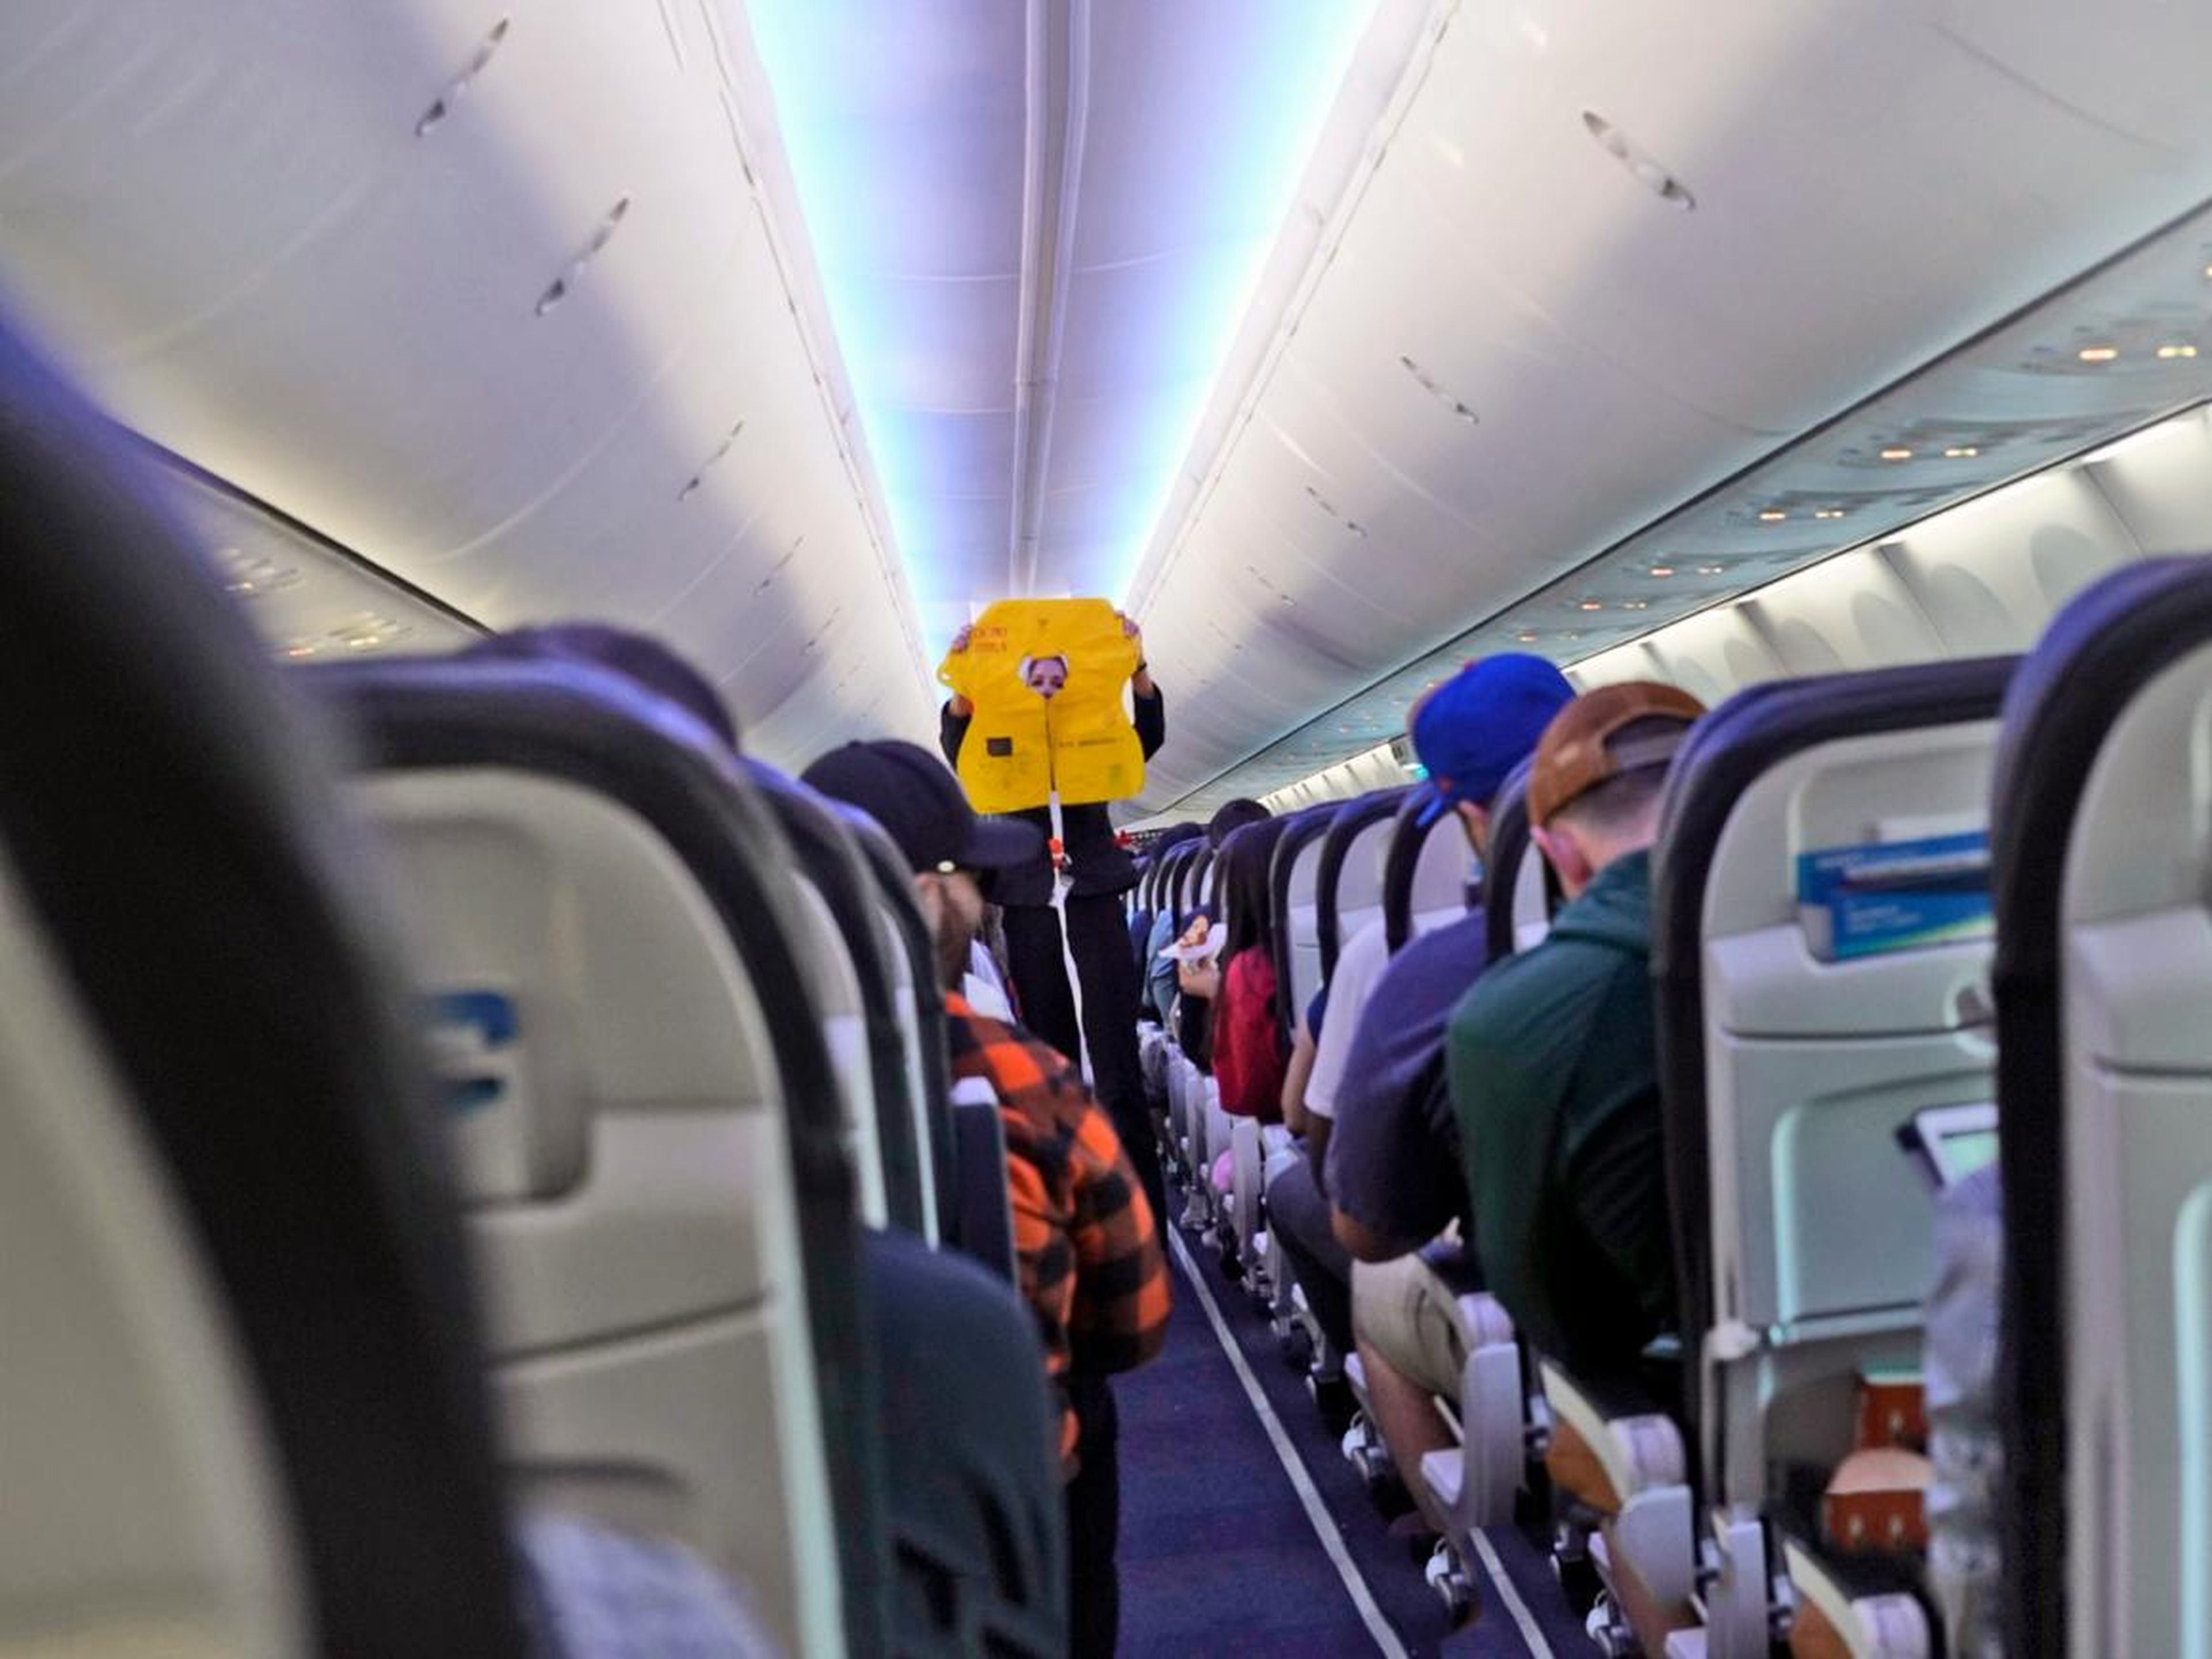 5. Pay attention to the safety presentation — even if you've flown before.